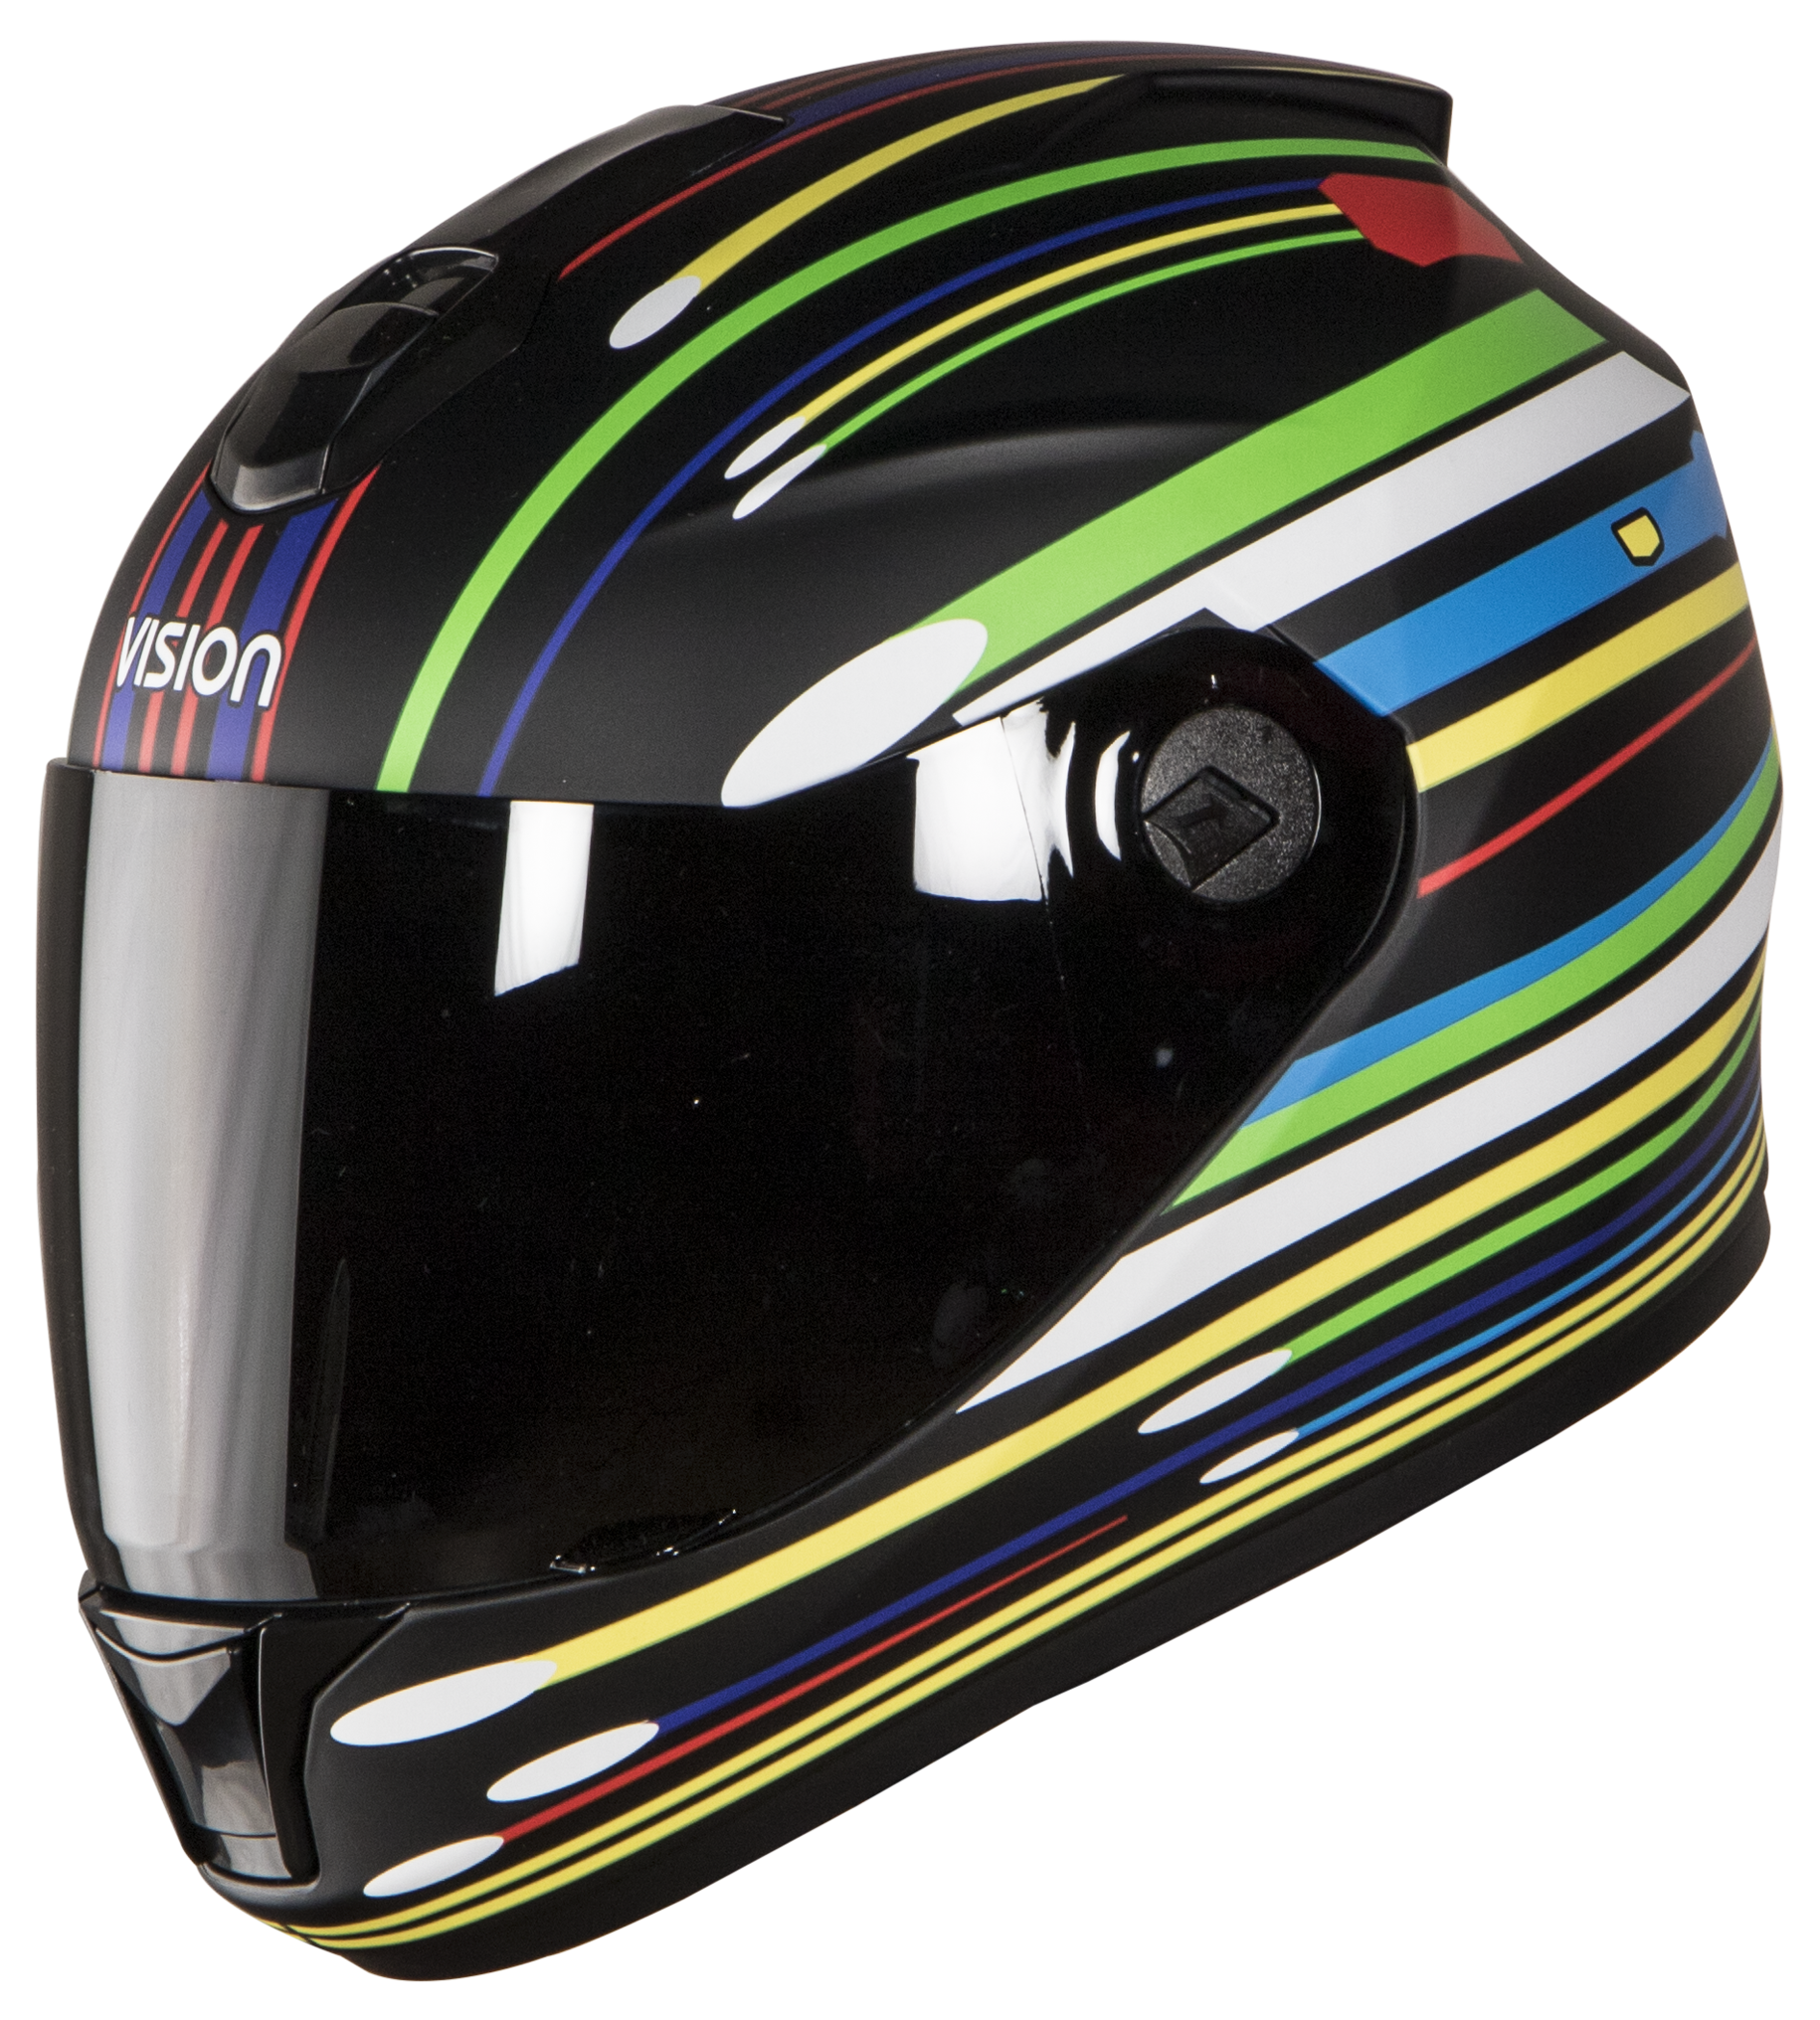 SBH-11 Vision Lucent Mat Black( Fitted With Clear Visor Extra Smoke Visor Free)